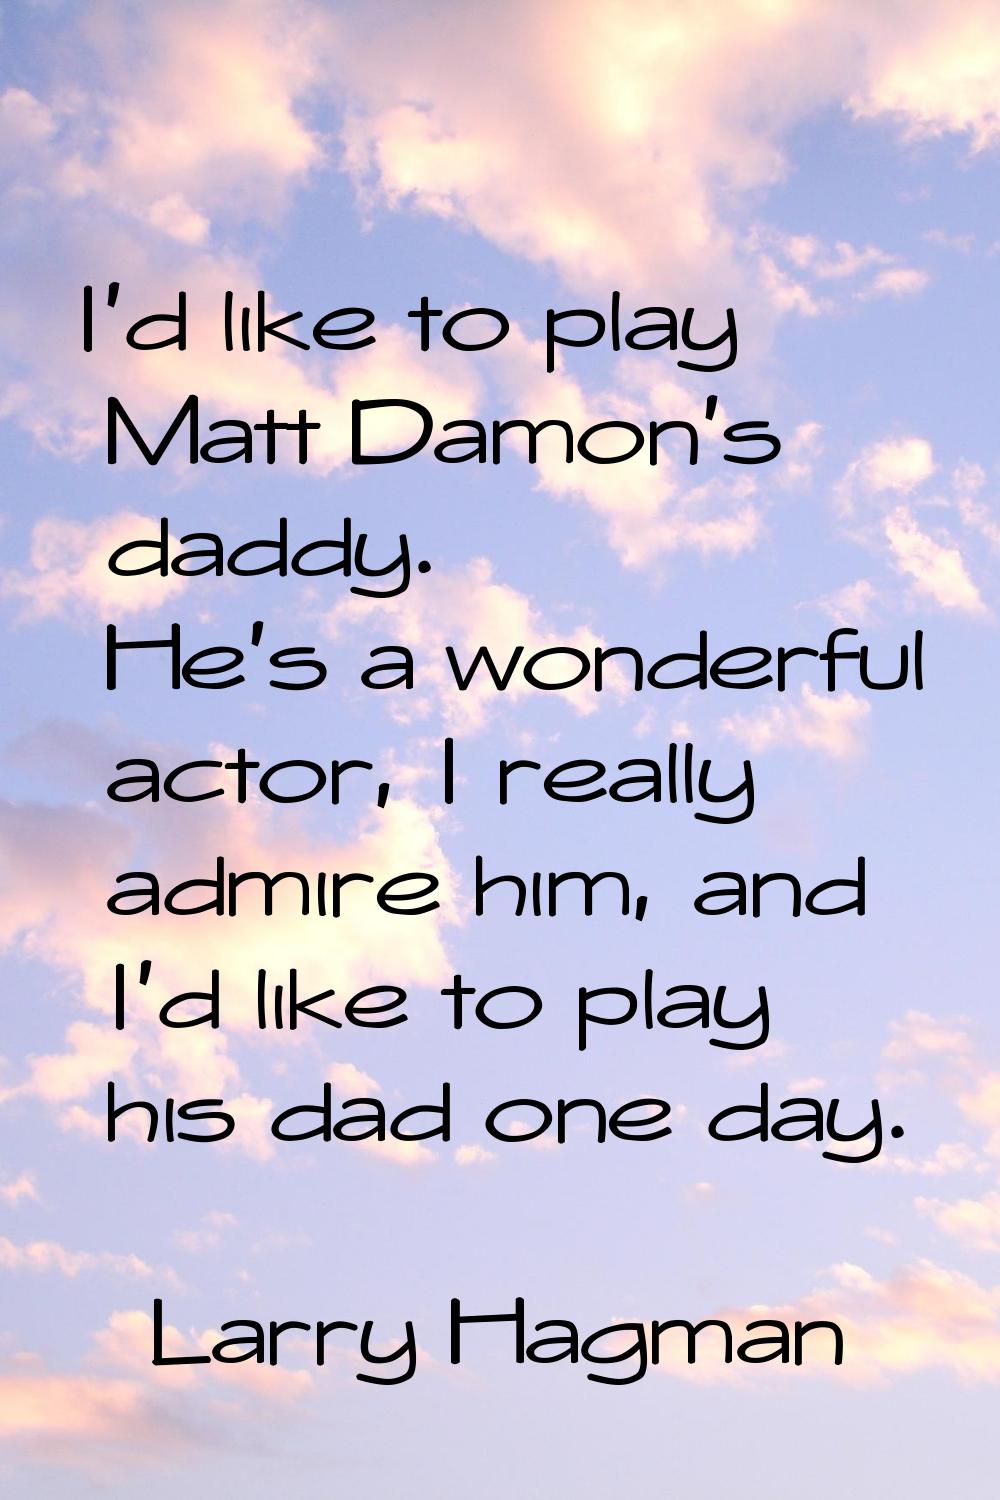 I'd like to play Matt Damon's daddy. He's a wonderful actor, I really admire him, and I'd like to p